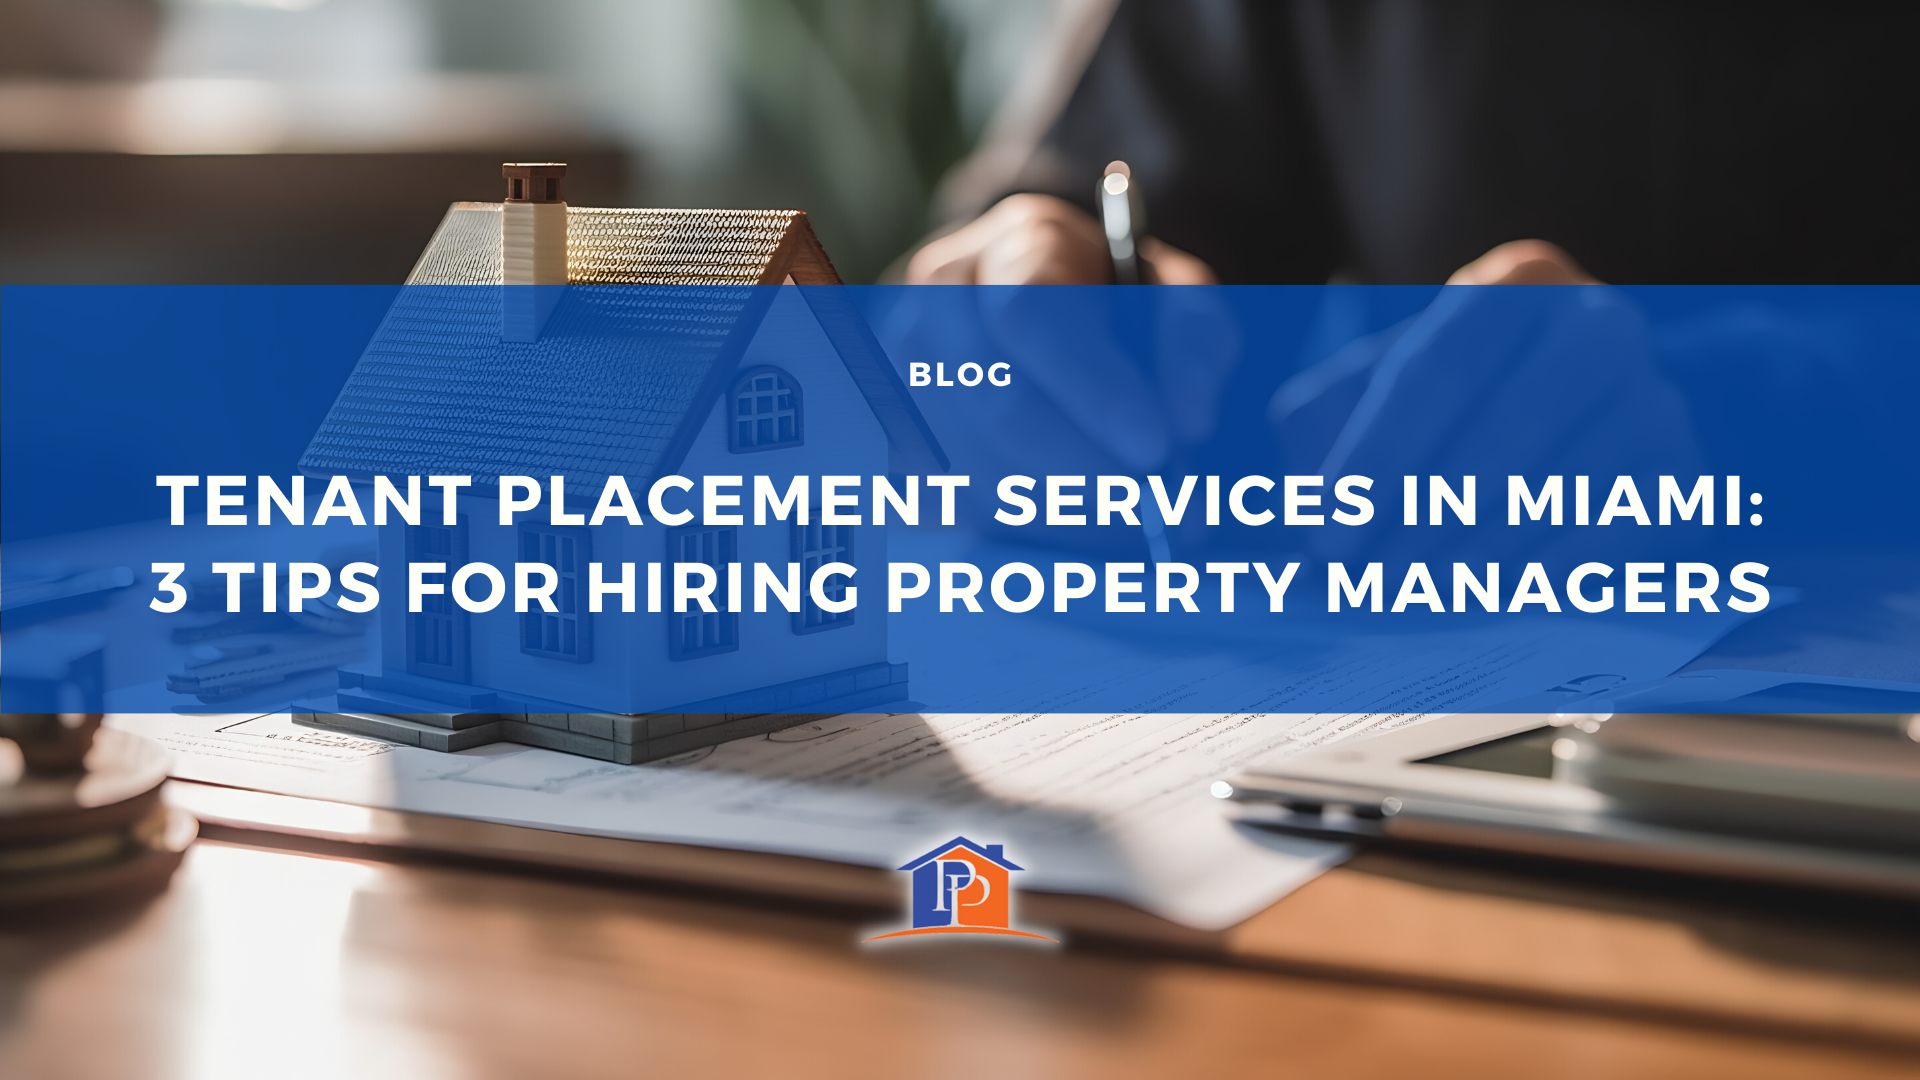 Tenant Placement Services in Miami: 3 Tips for Hiring Property Managers